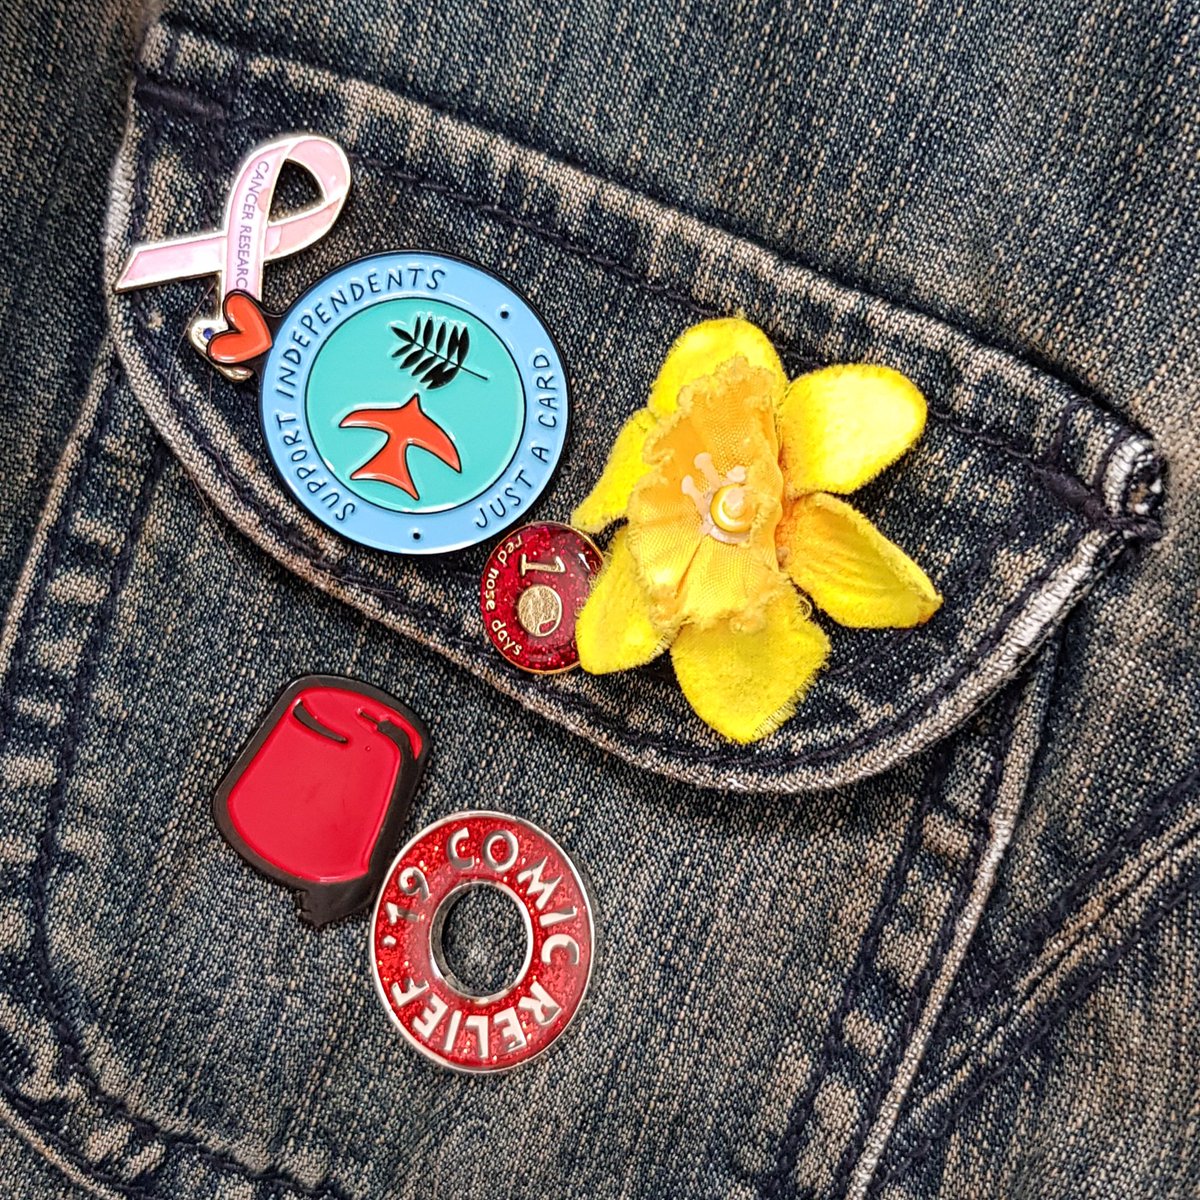 Look what came today #justacard @Justacard1 #SmallBusiness
#Smallbiz #HandmadeHour 
#handcraftedbusiness Ask me why it's important.There are many badges, few are chosen to go on my jacket #comicrelief #comicrelief10 #mariecuriecancercare #breastcancercare @Tog4ShortLives